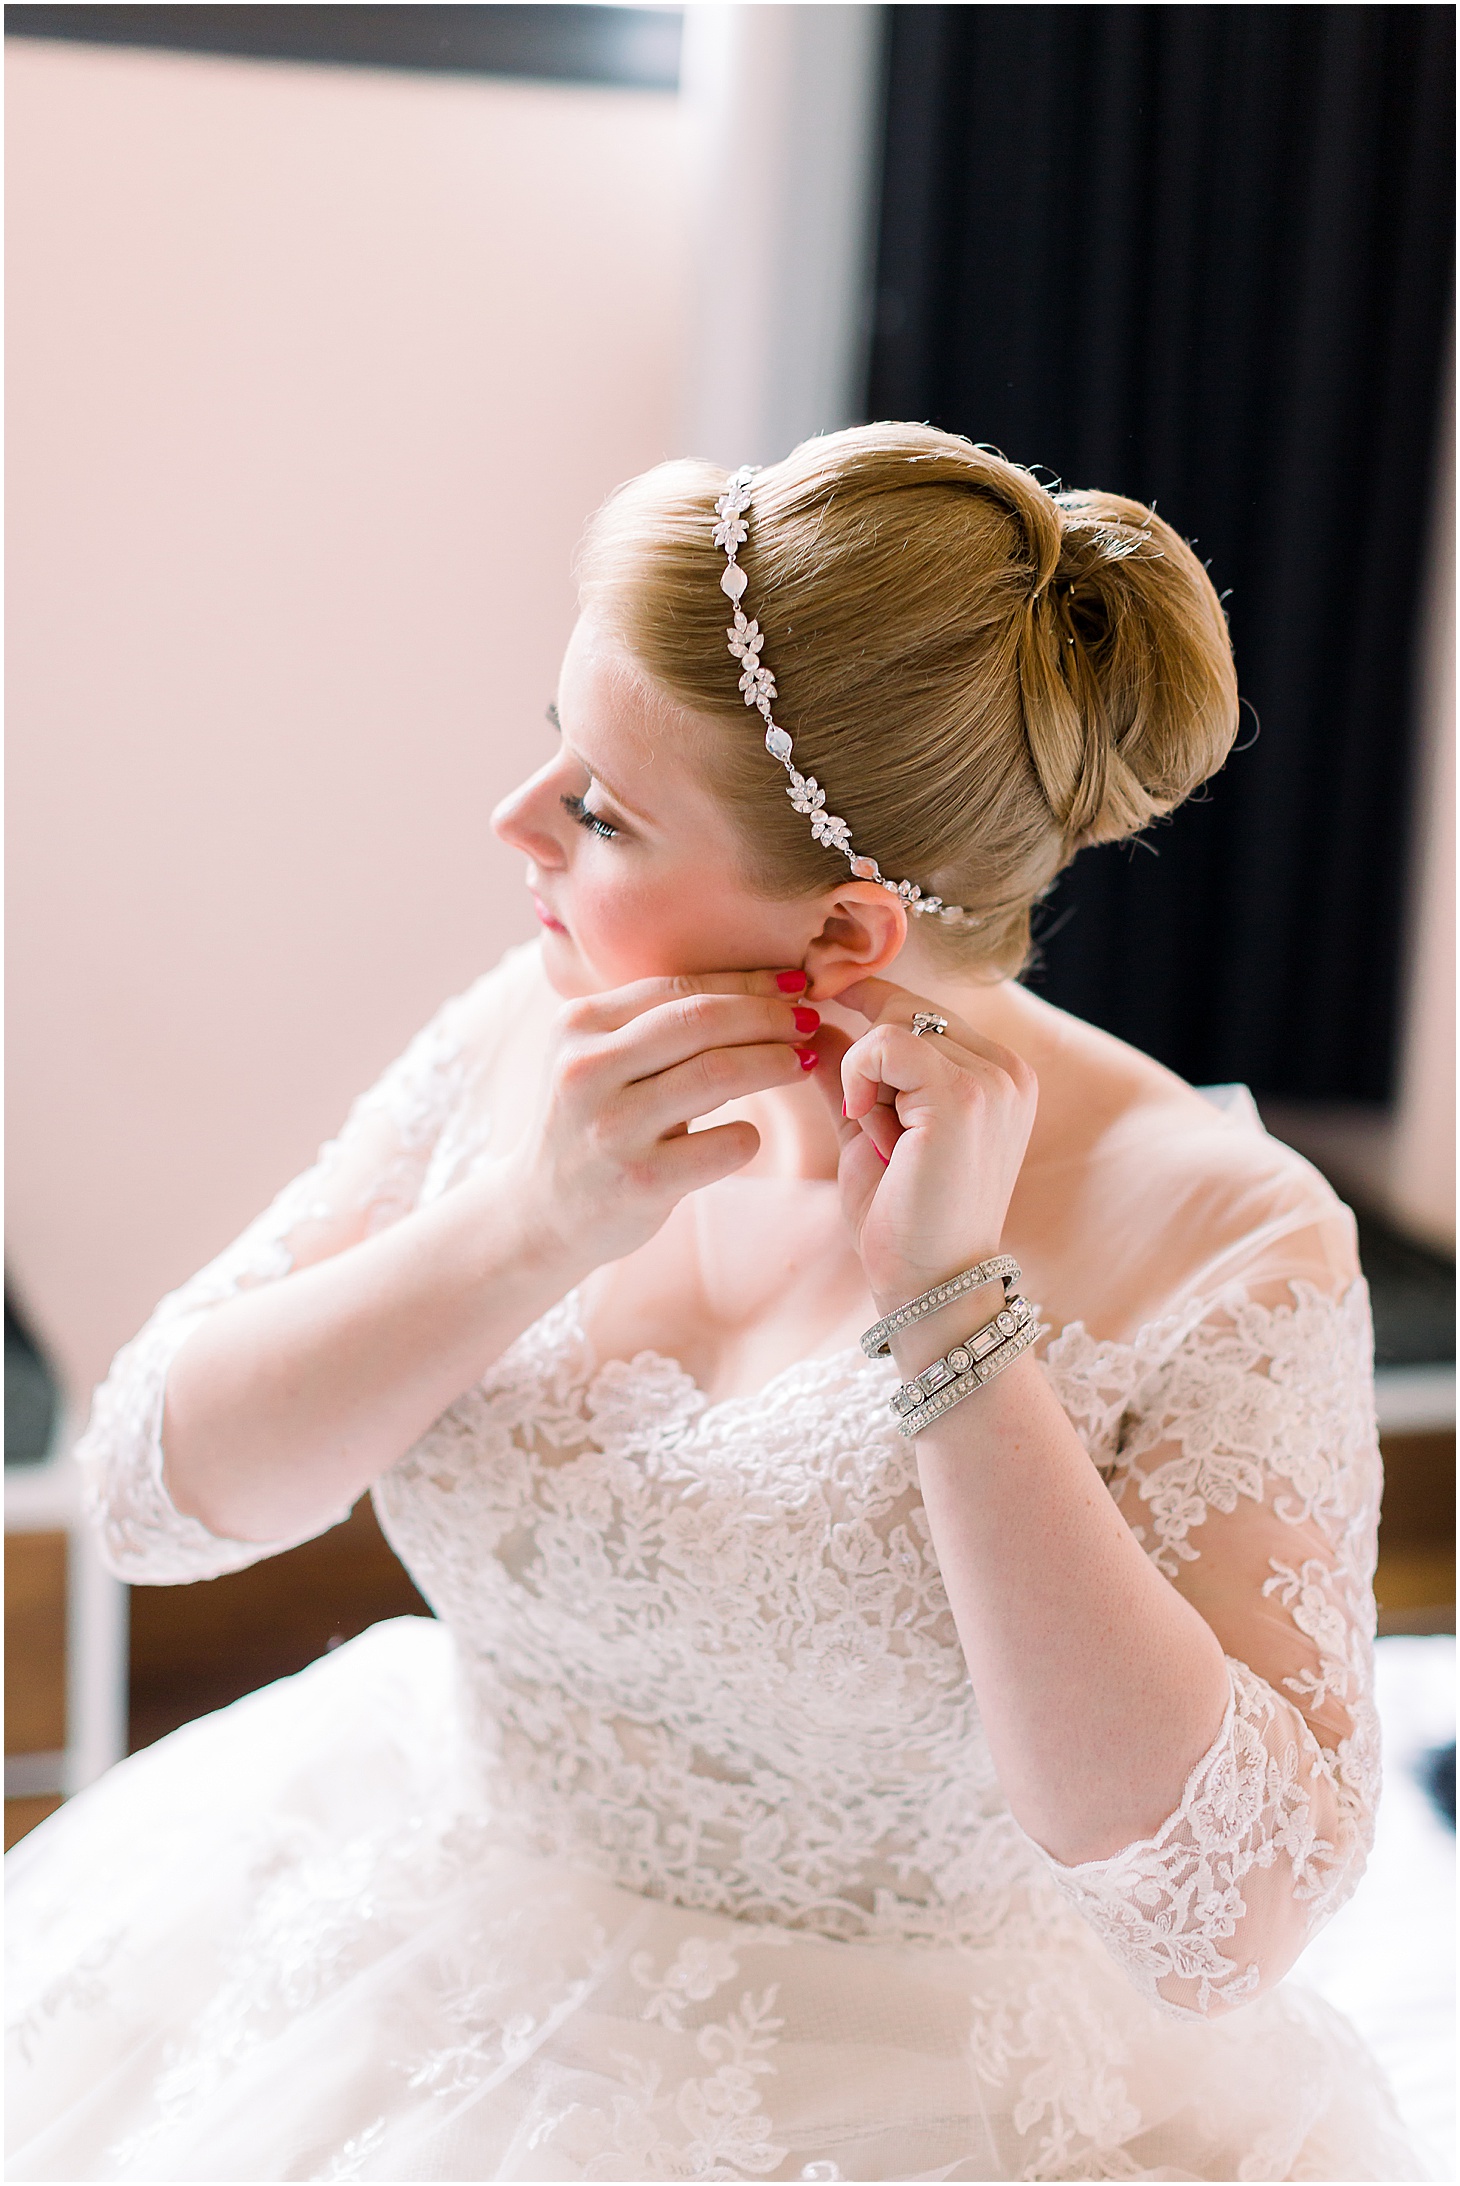 Bride Getting Ready at Quirk Hotel, Maggie Sottero Wedding Dress, Ceremony at Grace and Holy Trinity Episcopal Church, Burgundy and Blush Christmas Wedding at Richmond’s Commonwealth Club, Sarah Bradshaw Photography